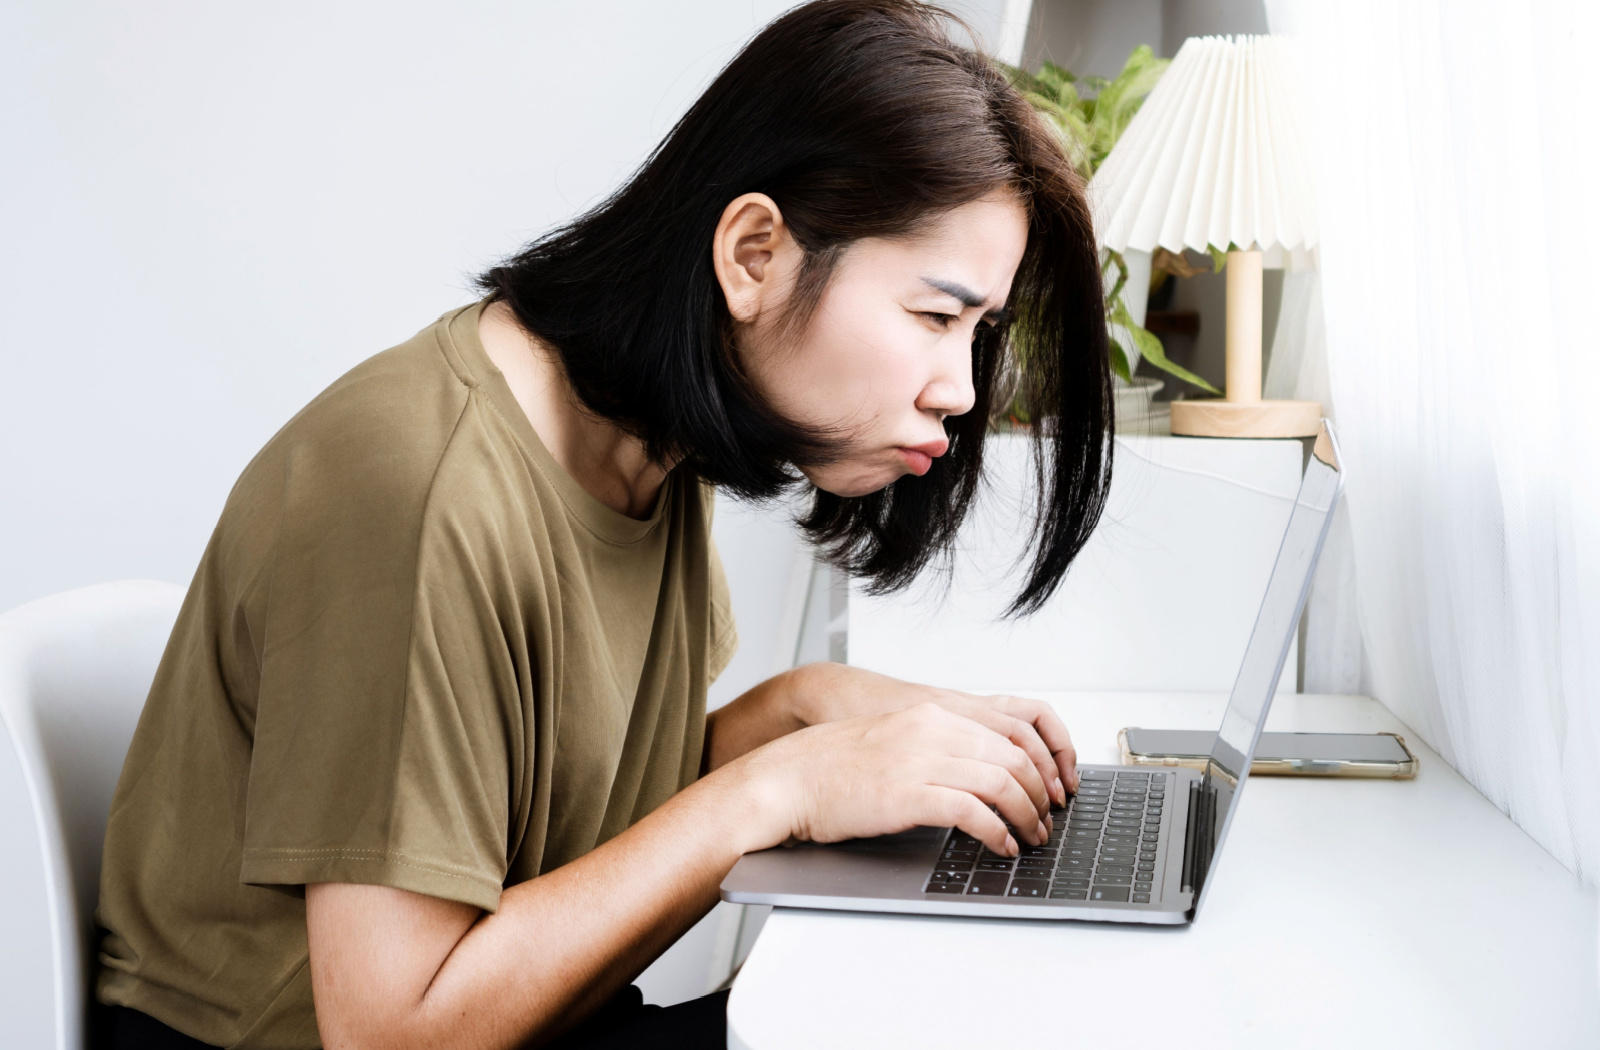 A woman hunched over while working on a laptop, leaning in and squinting to see the screen.